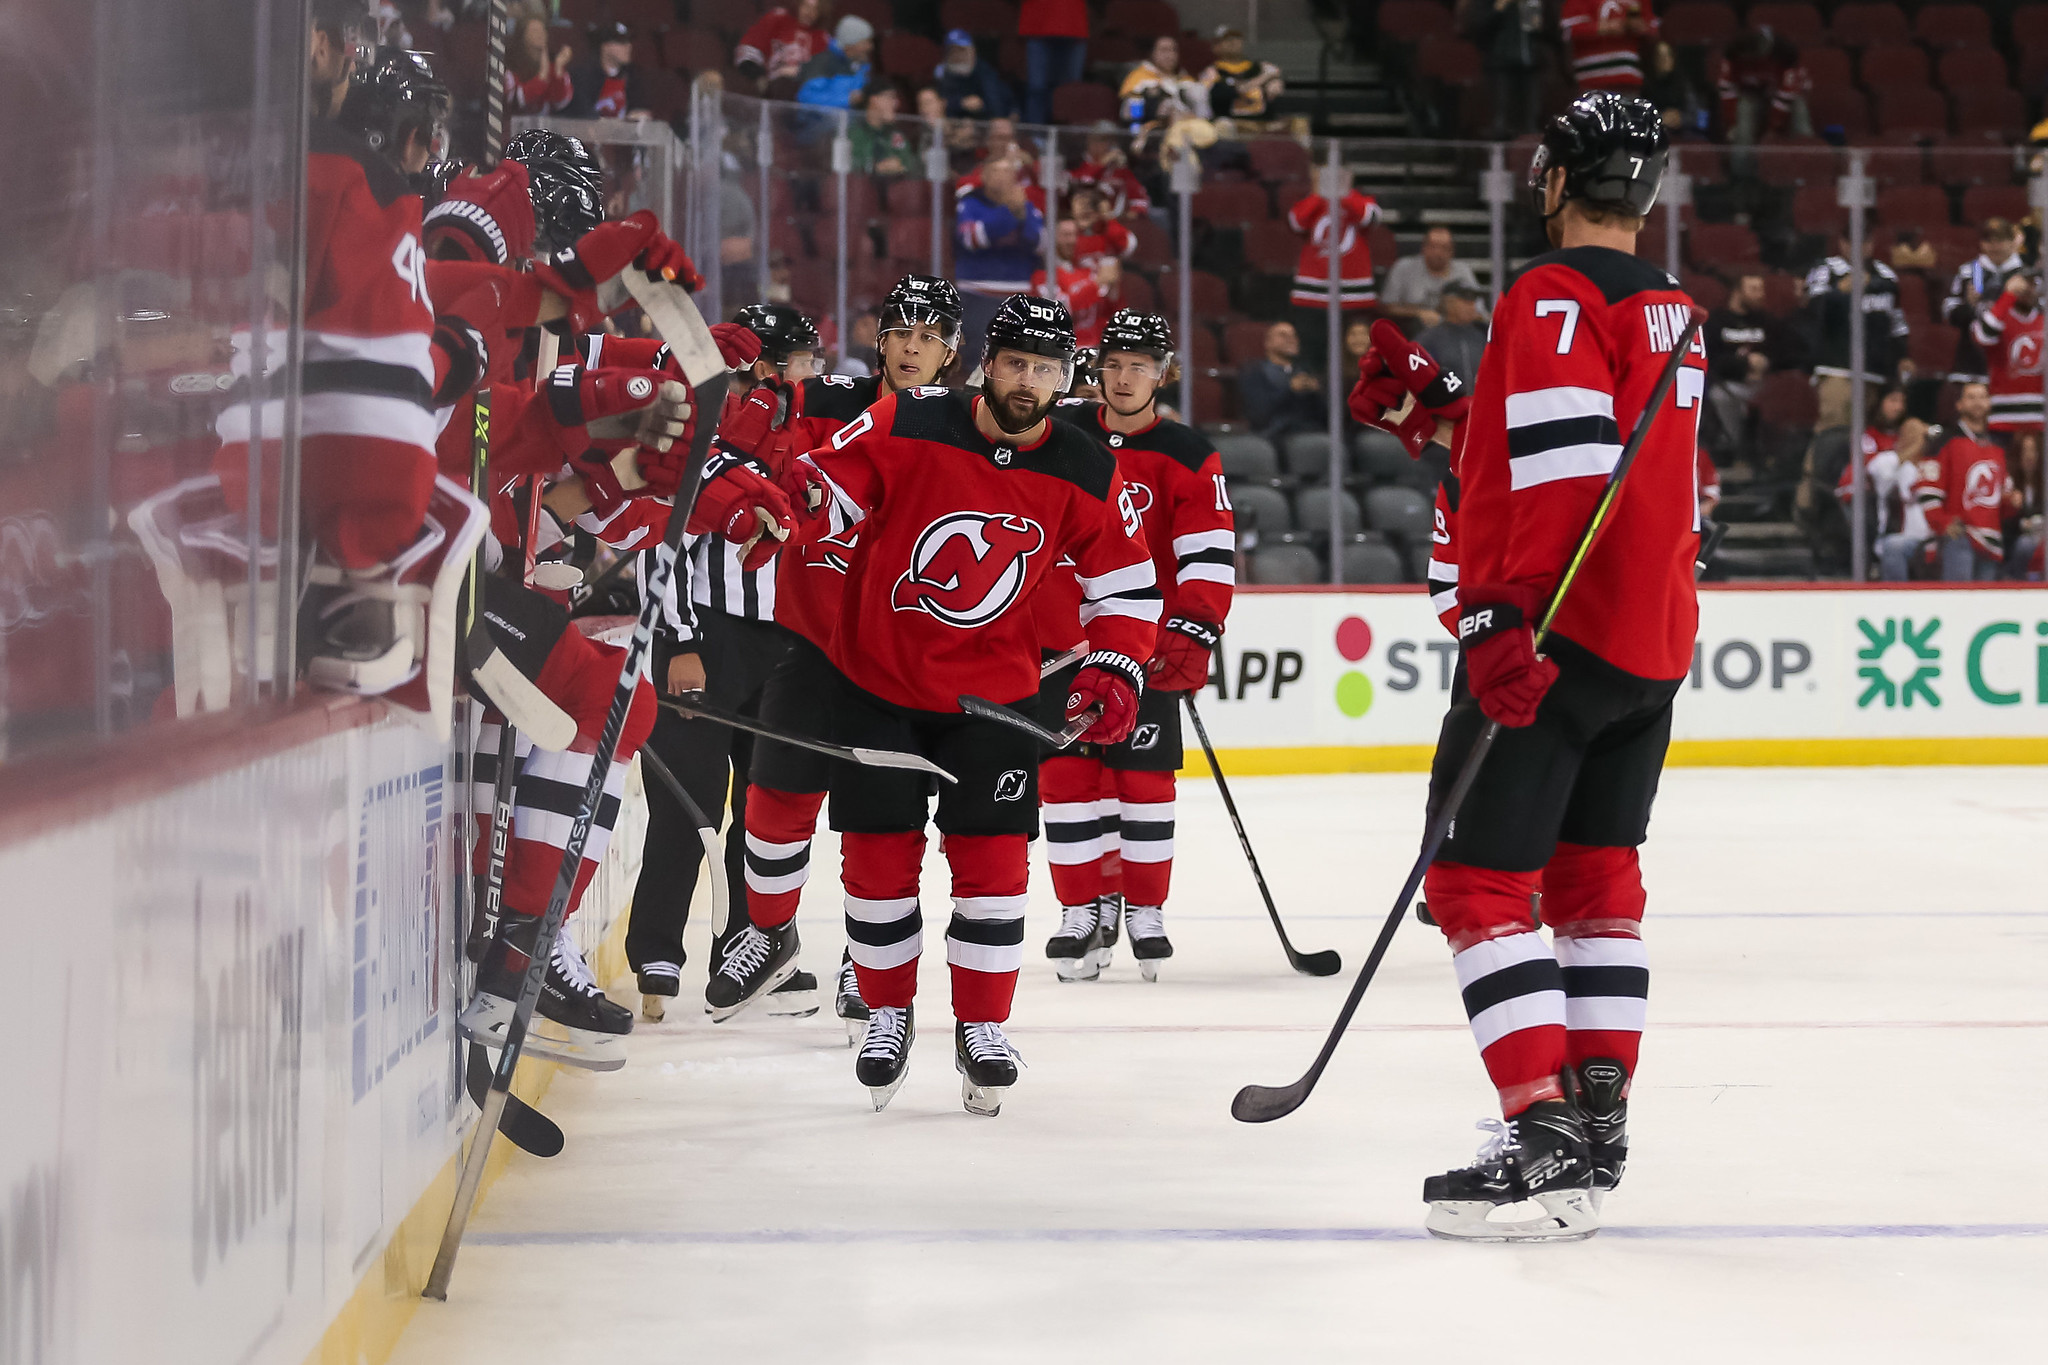 Devils rout Panthers 7-3 as Blackwood wins 1st of season